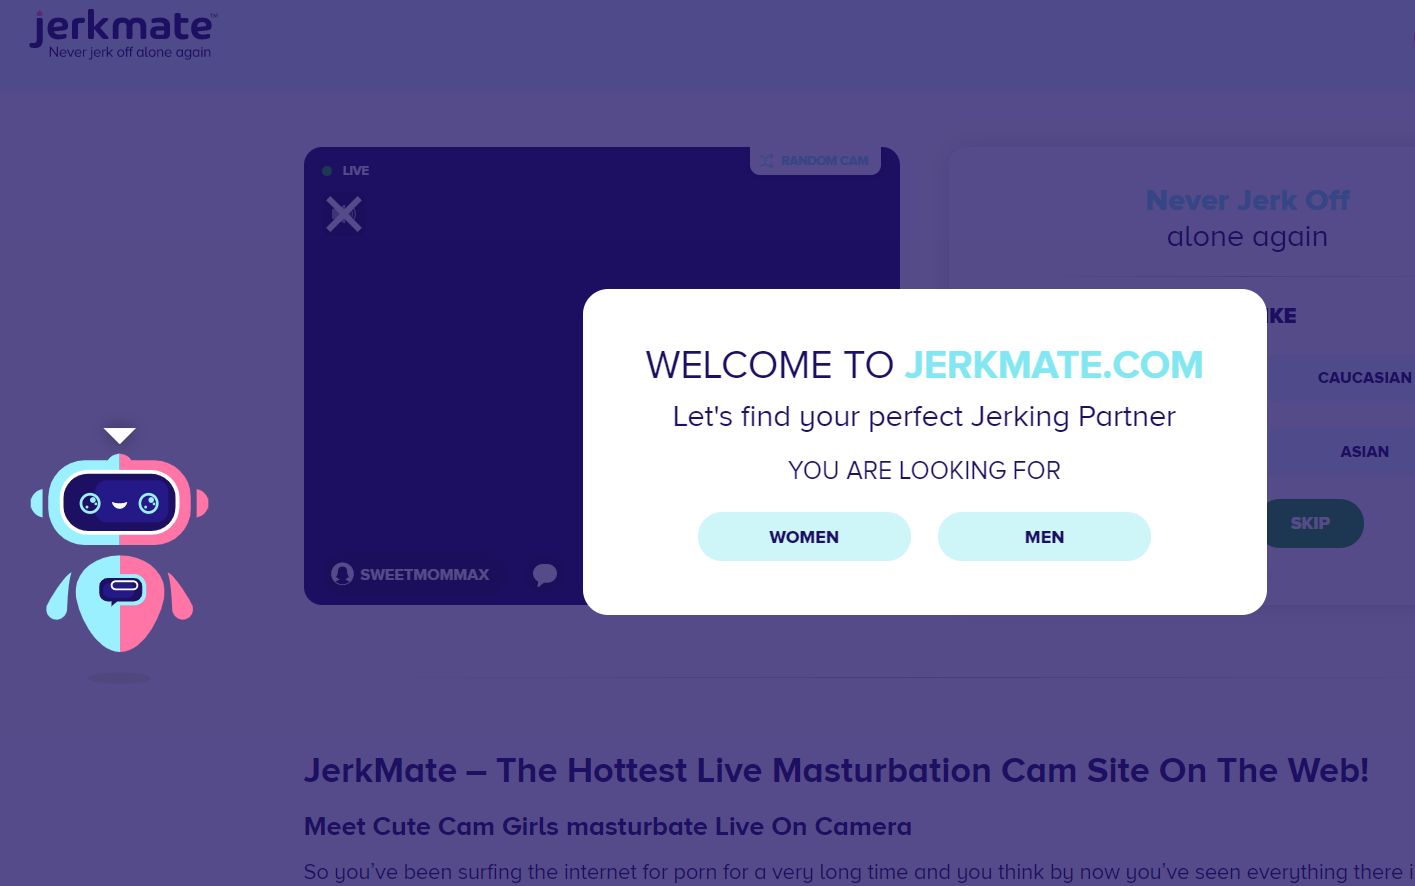 Jerkmate: Live Sex Cams and Adult Chat Rooms